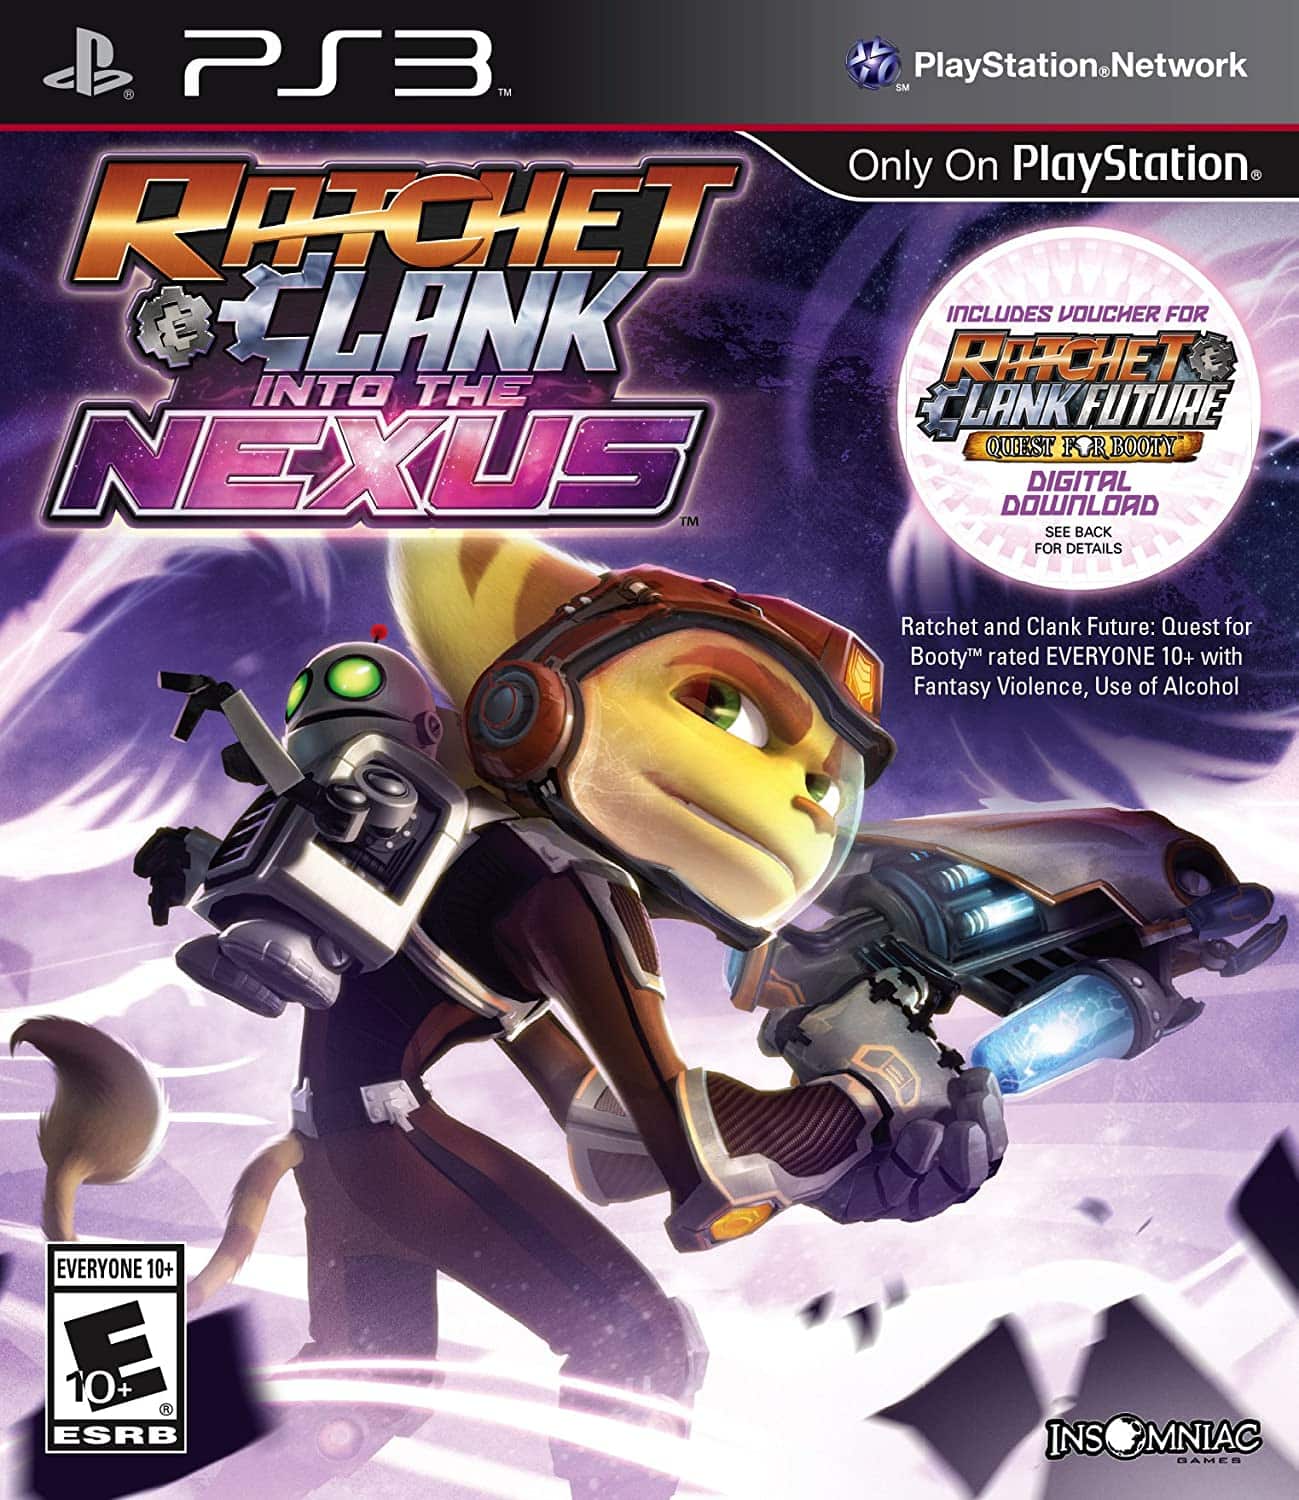 Ratchet & Clank: Into the Nexus player count stats